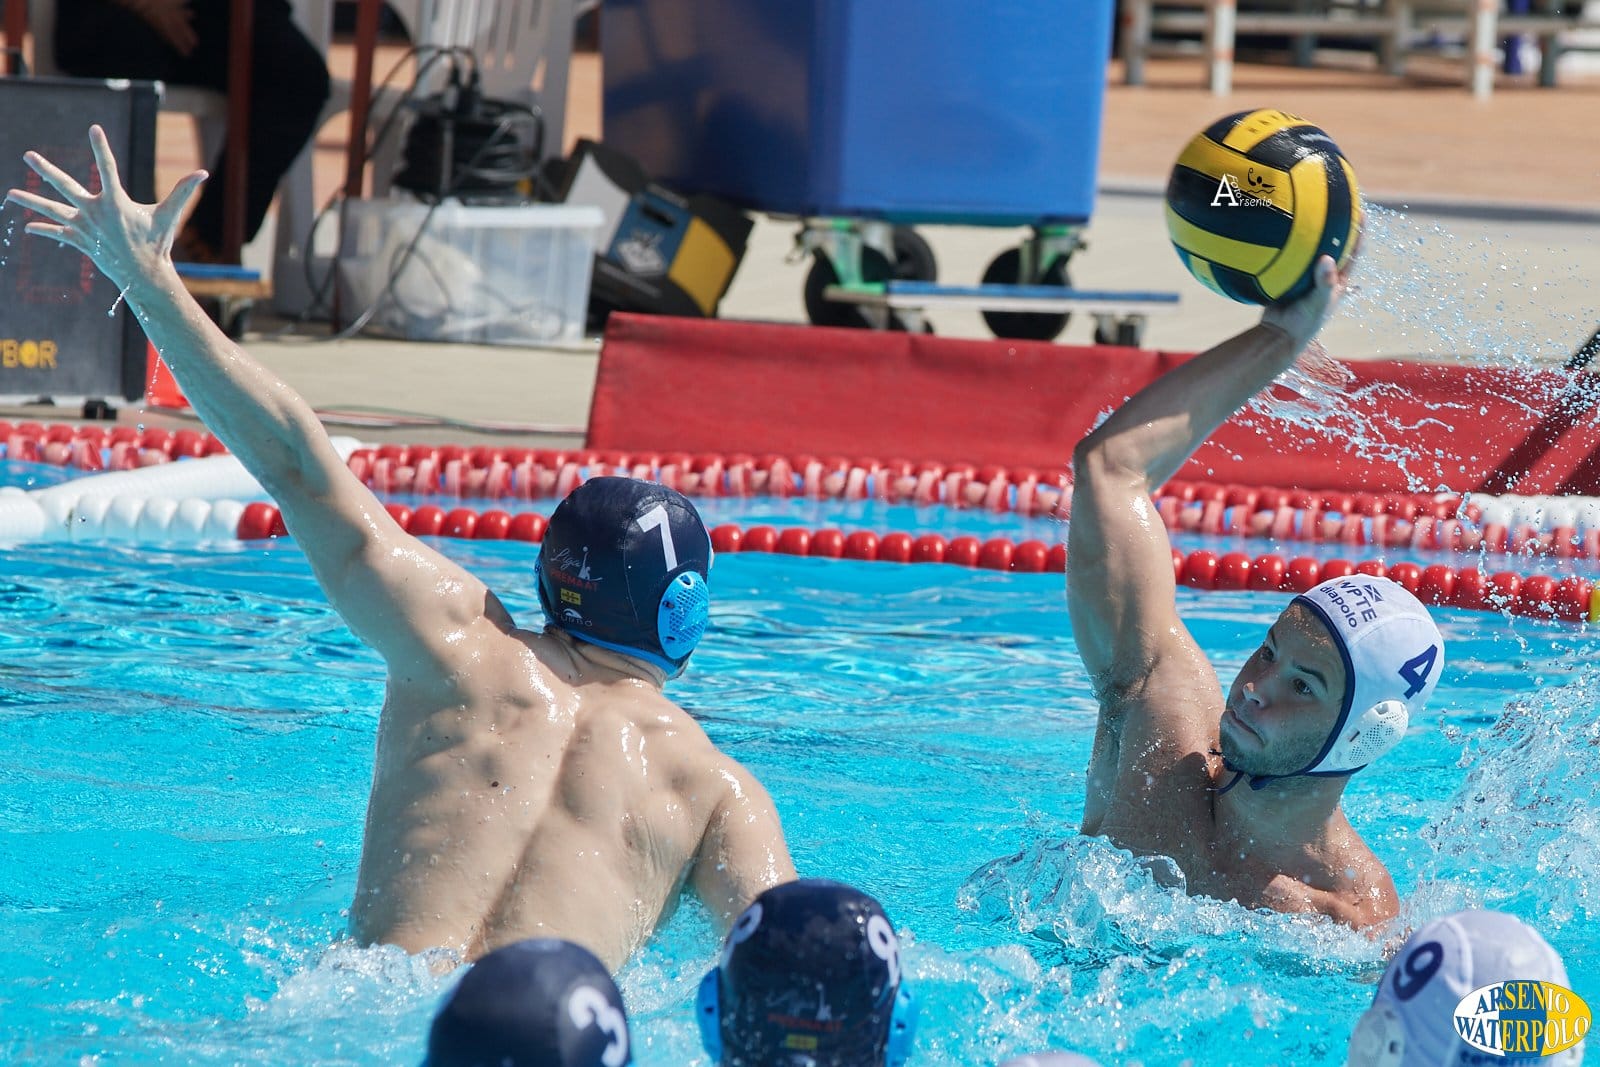 LEWaterpolo J16 (9)